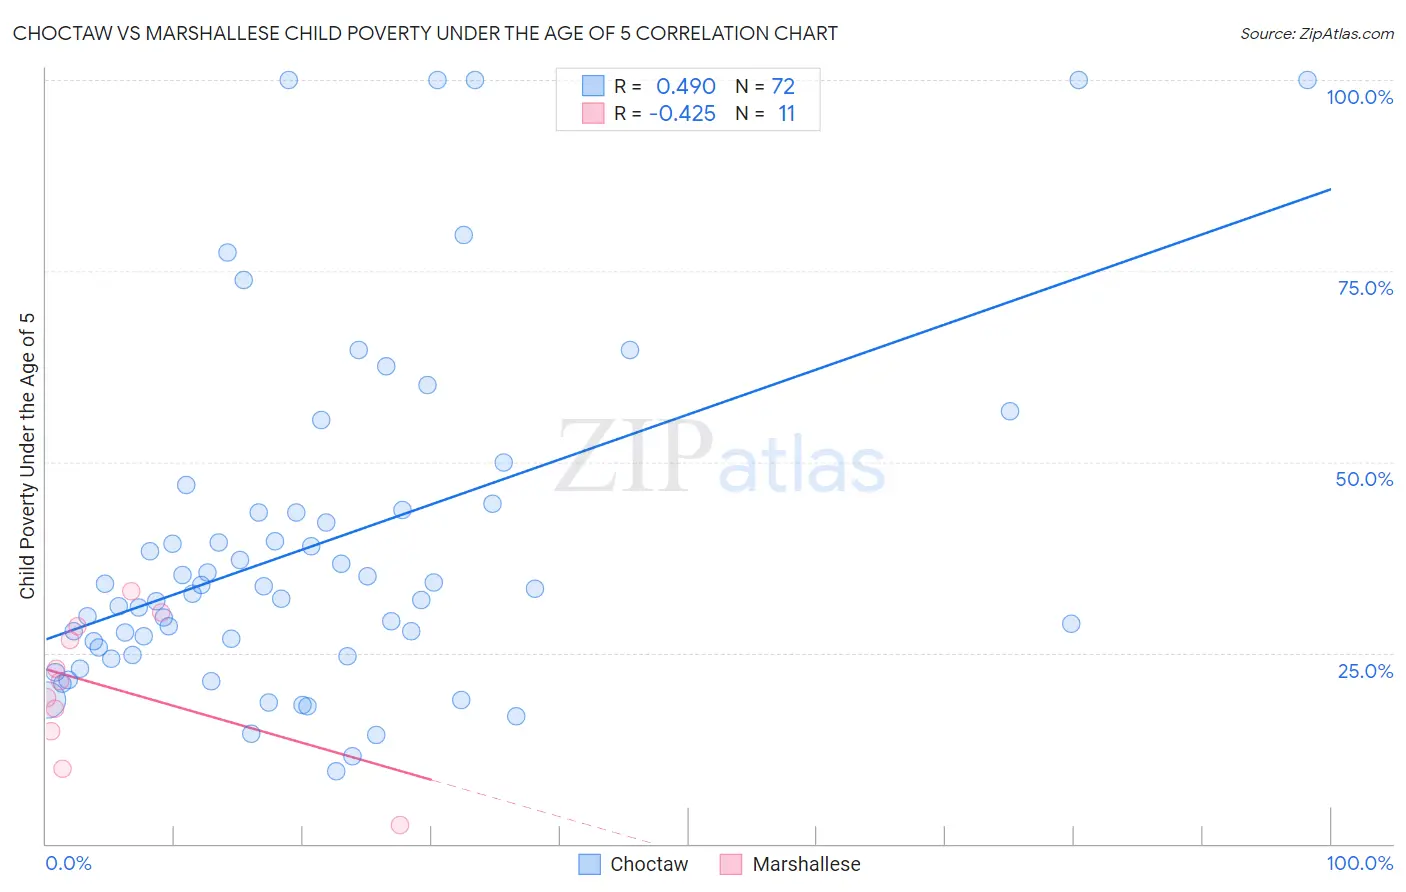 Choctaw vs Marshallese Child Poverty Under the Age of 5